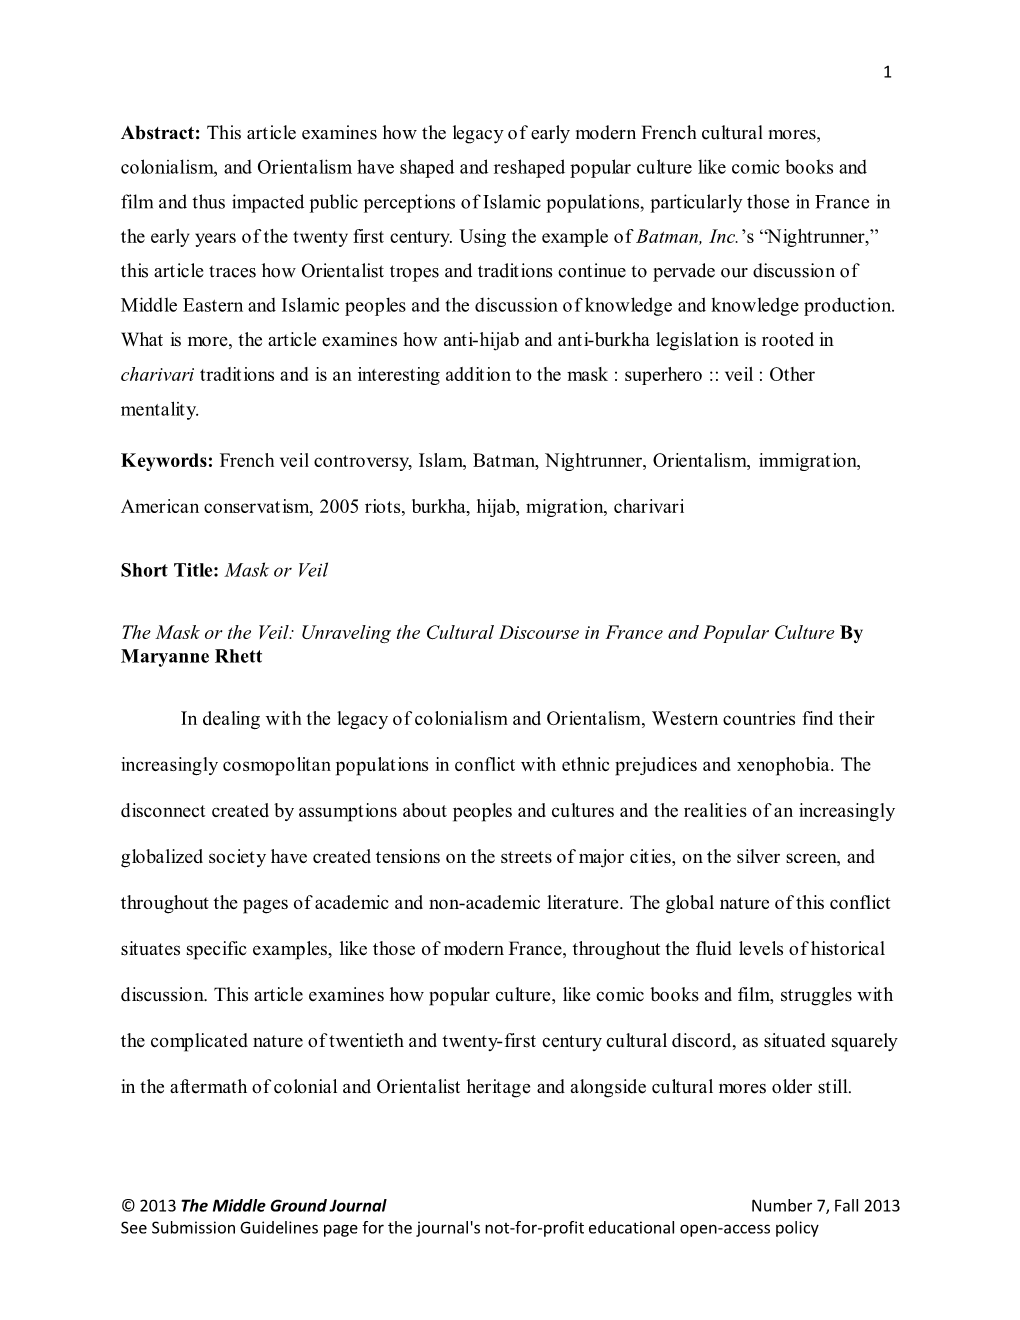 Abstract: This Article Examines How the Legacy of Early Modern French Cultural Mores, Colonialism, and Orientalism Have Shaped A